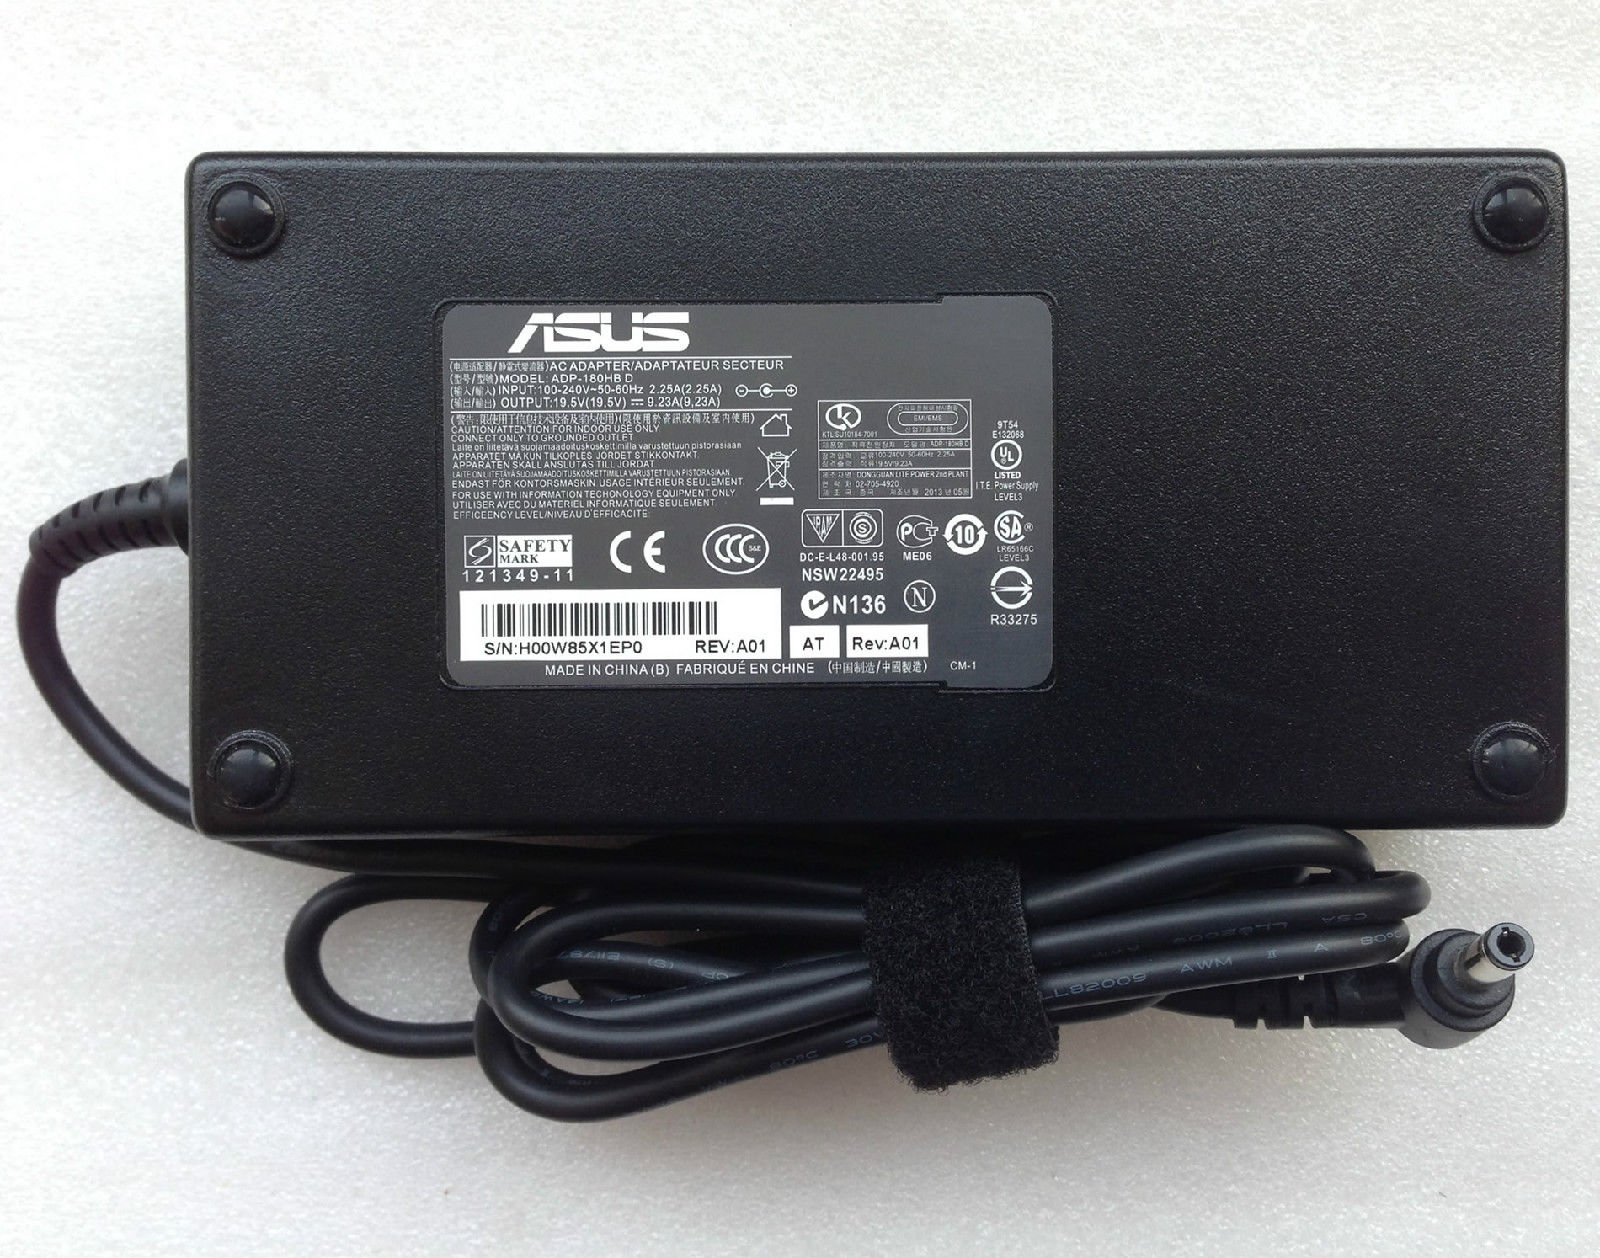 19.5v 9.23a ASUS ROG G751JY-T7052H 180W laptop power supply